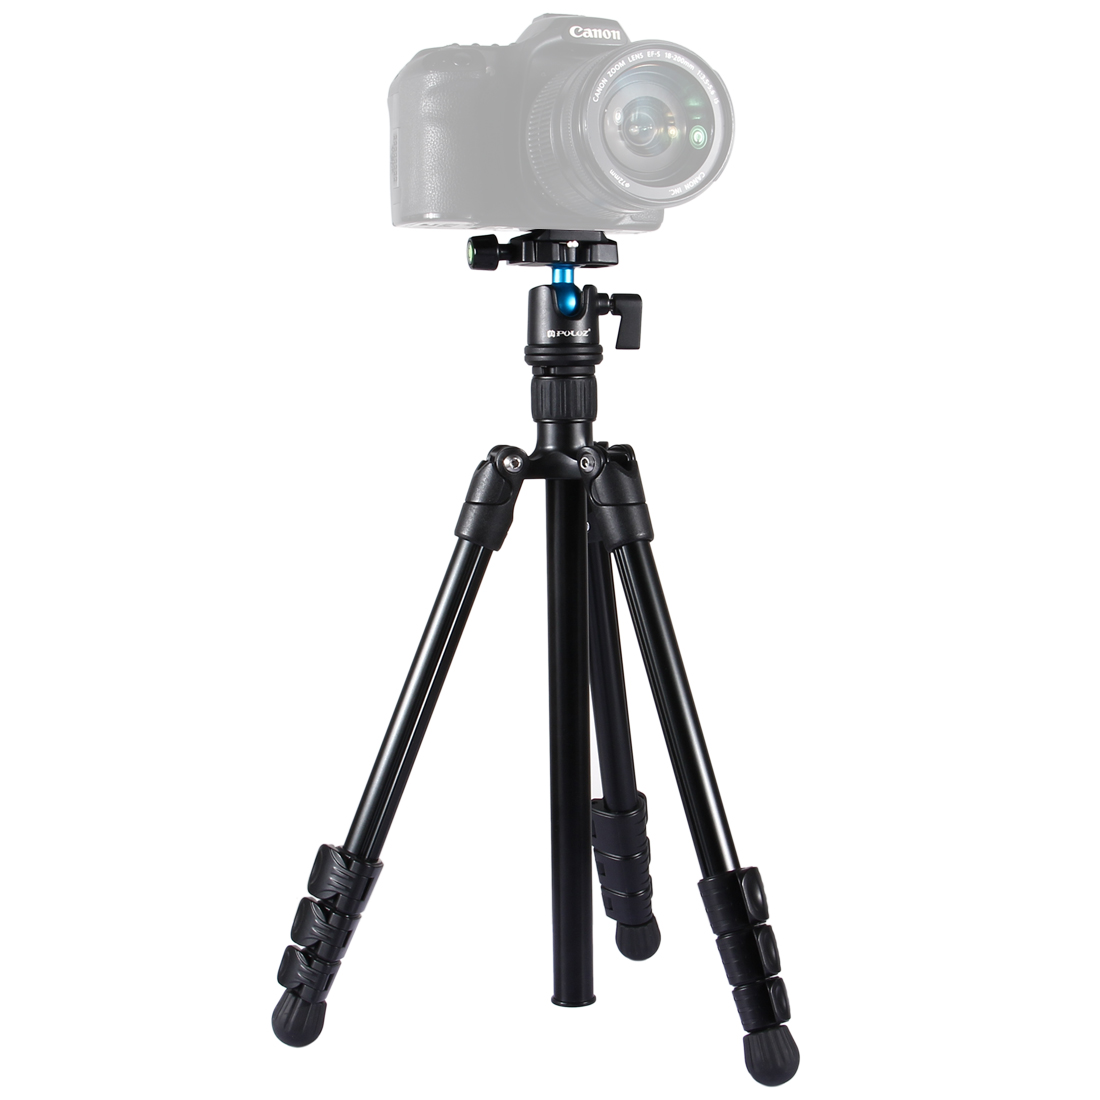 

PULUZ PU3009 4-Section Folding Legs Metal Tripod Mount with 360 Degree Ball Head for DSLR